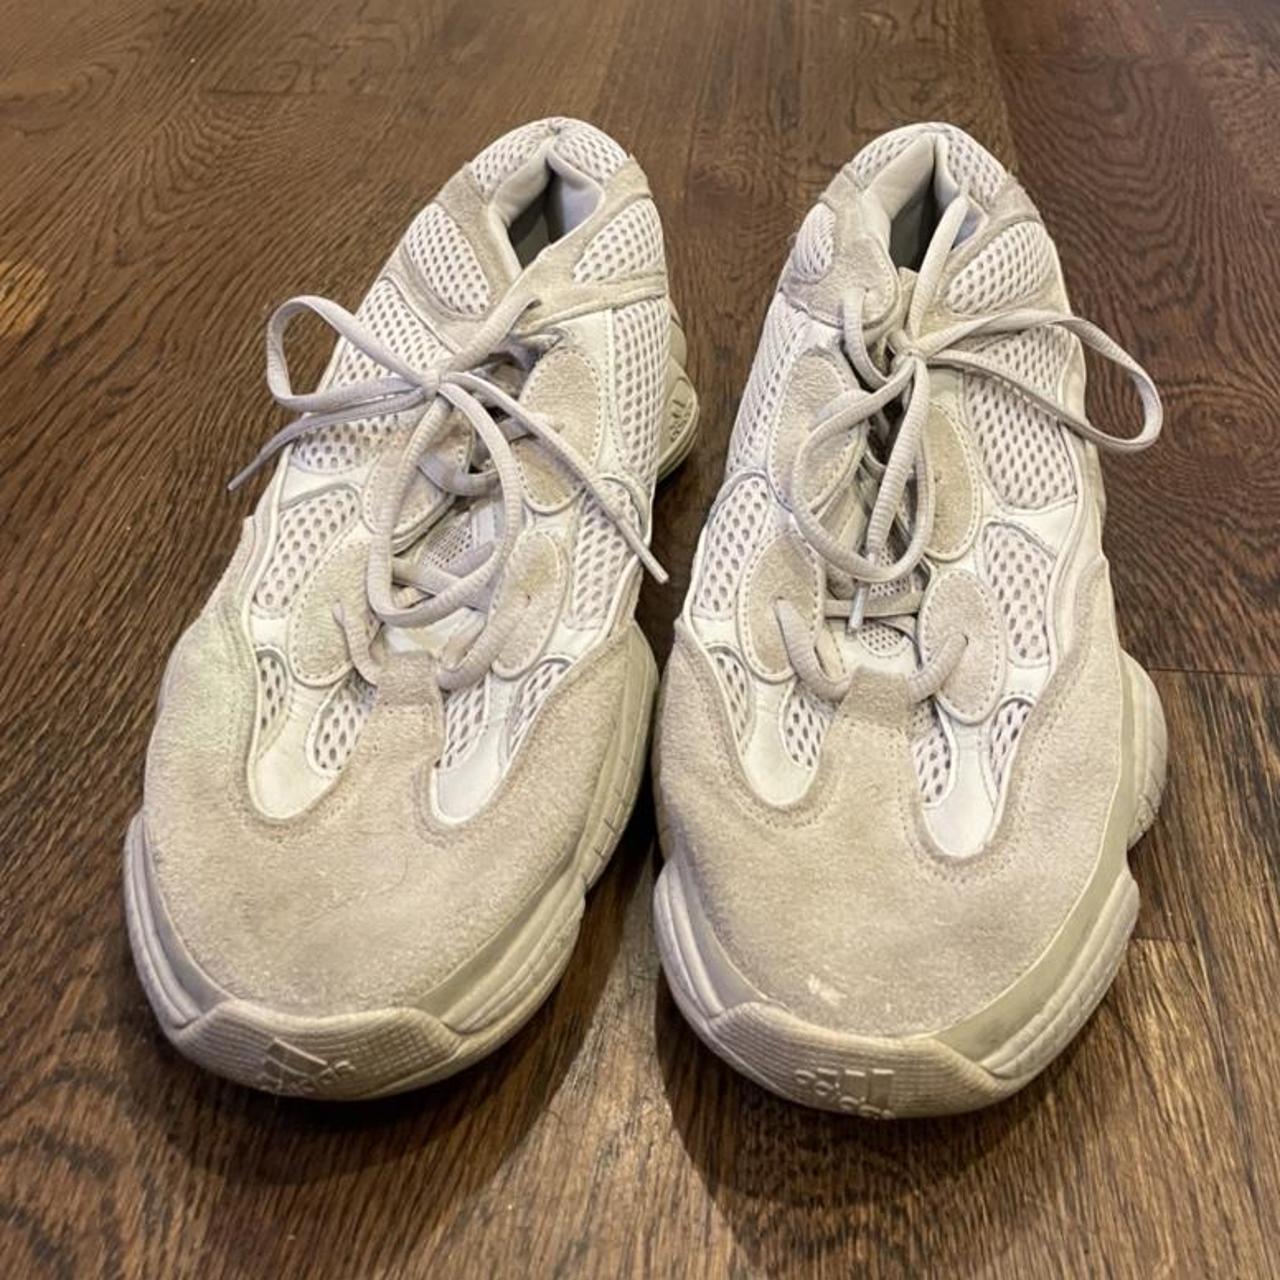 Yeezy 500s - Slight stain on right shoe pictured - Depop